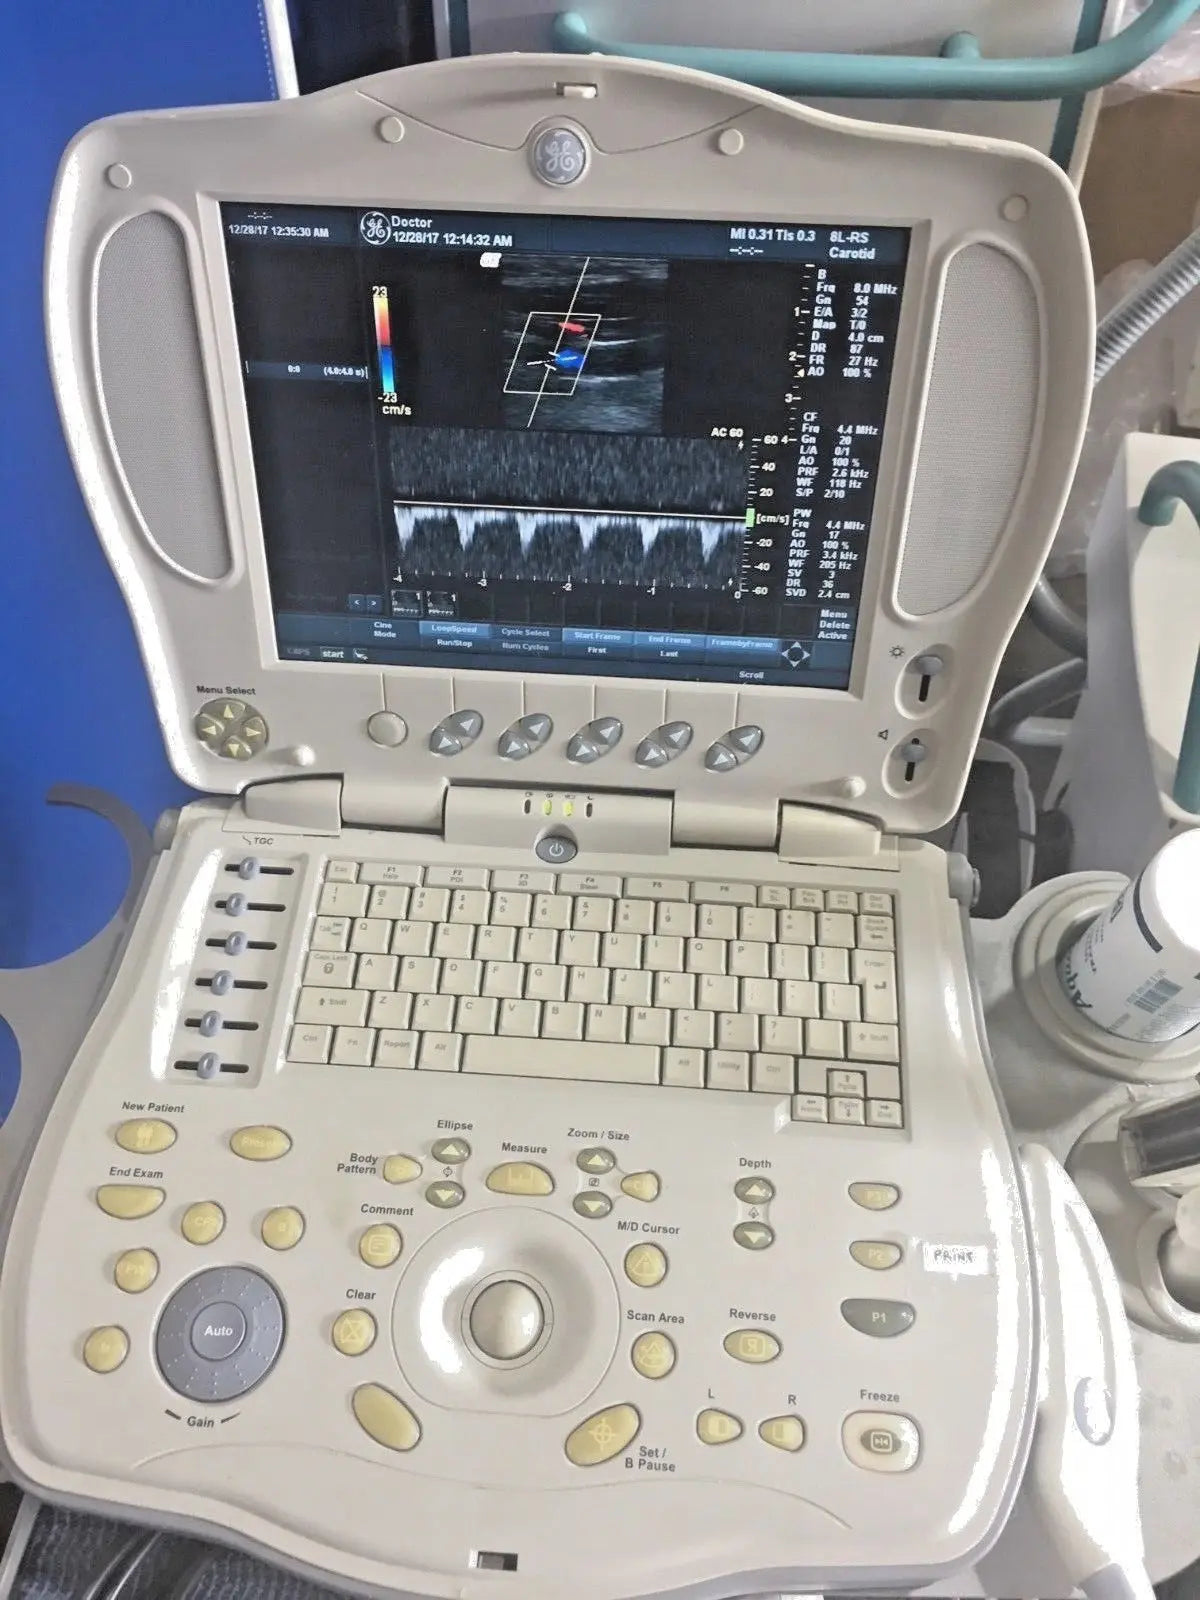 GE LogiqBook XP Porable Ultrasound with 3 transducers & Cart